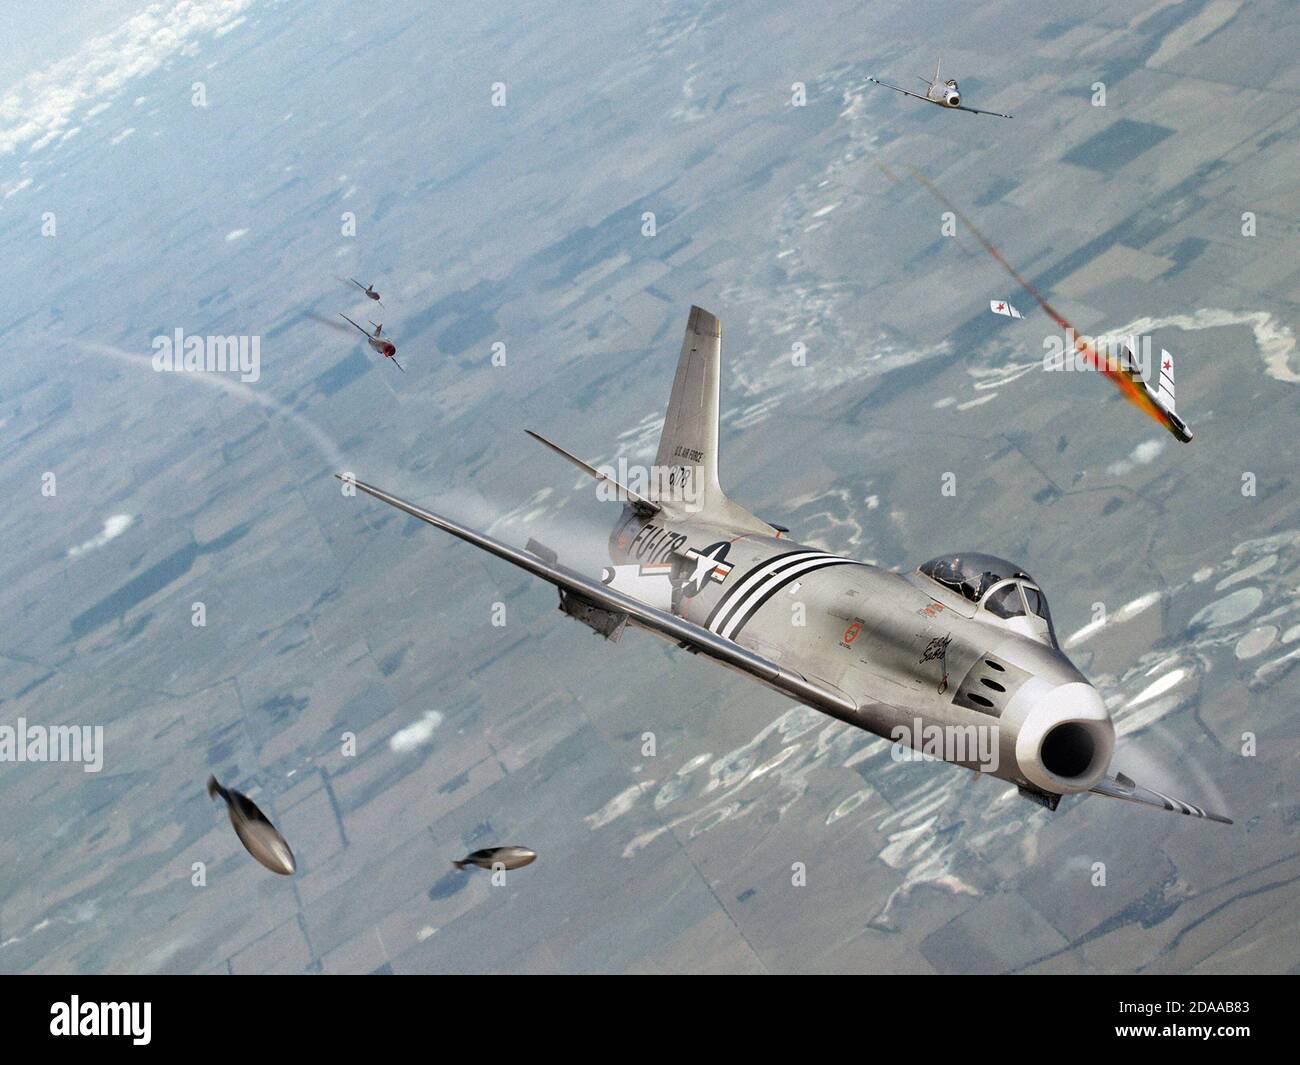 North American F86 Sabre jet fighters duelling with MiG15 jets during the Korean war. A mixture of plastic models and Photoshop. Stock Photo